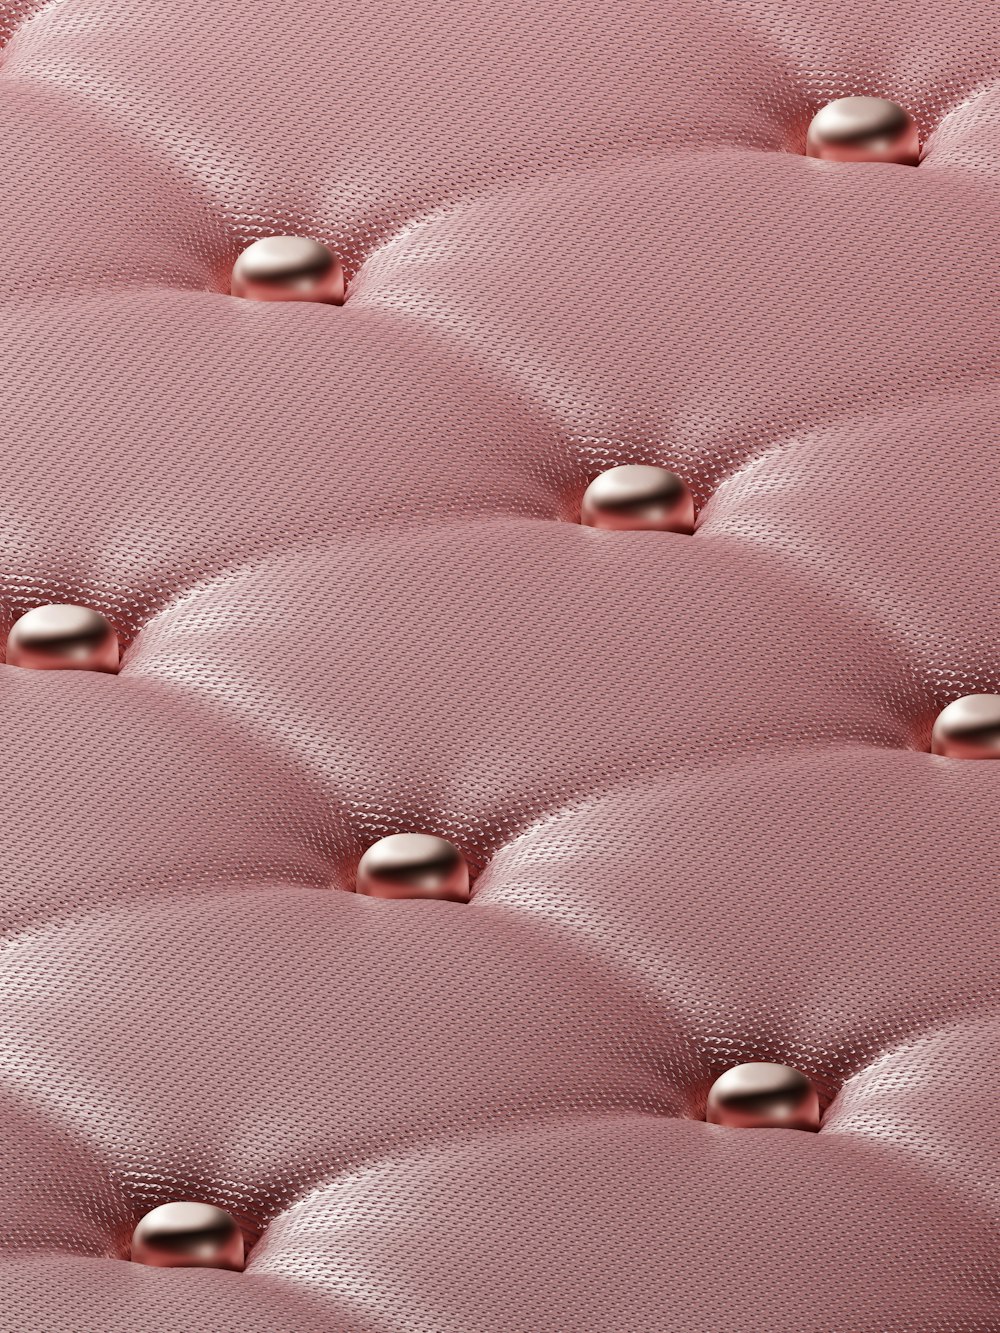 a close up of a pink leather upholster